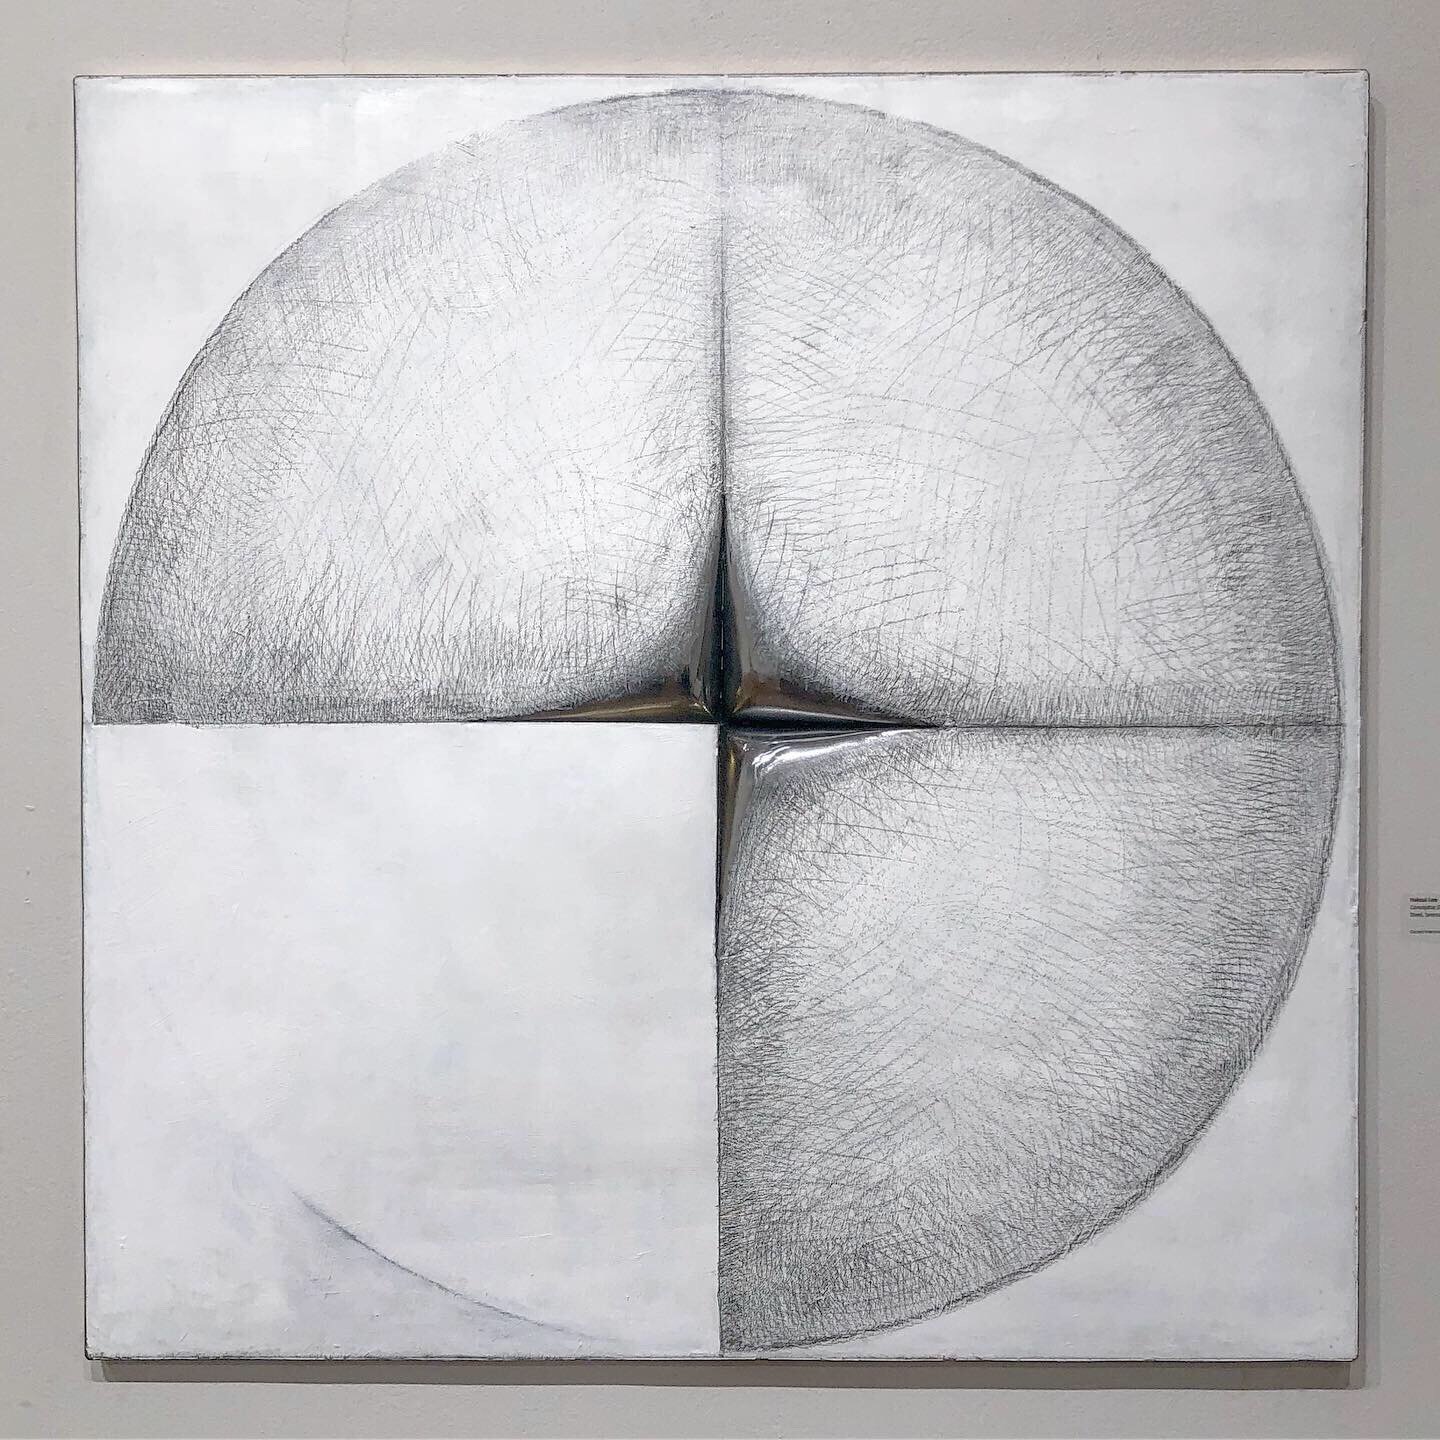 Conceptus Et , 2019. Pencil drawing and acrylic painting on formed steel and bronze. H 36” x W 36” x D 5”